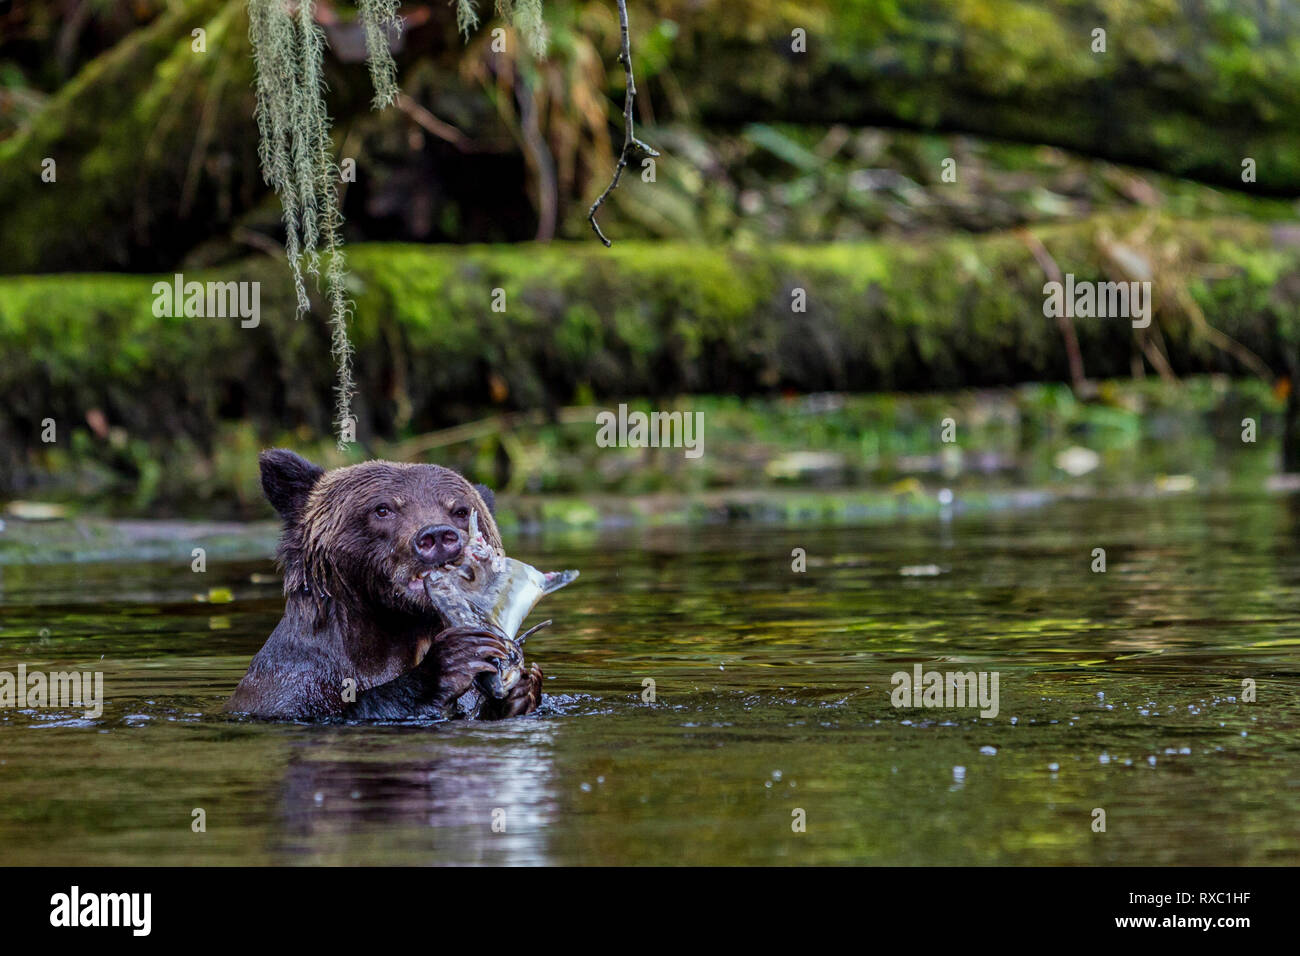 Grizzly bear feeding on salmon at a river mouth in the Great Bear Rainforest, First Nations Territory, British Clumbia, Canada Stock Photo